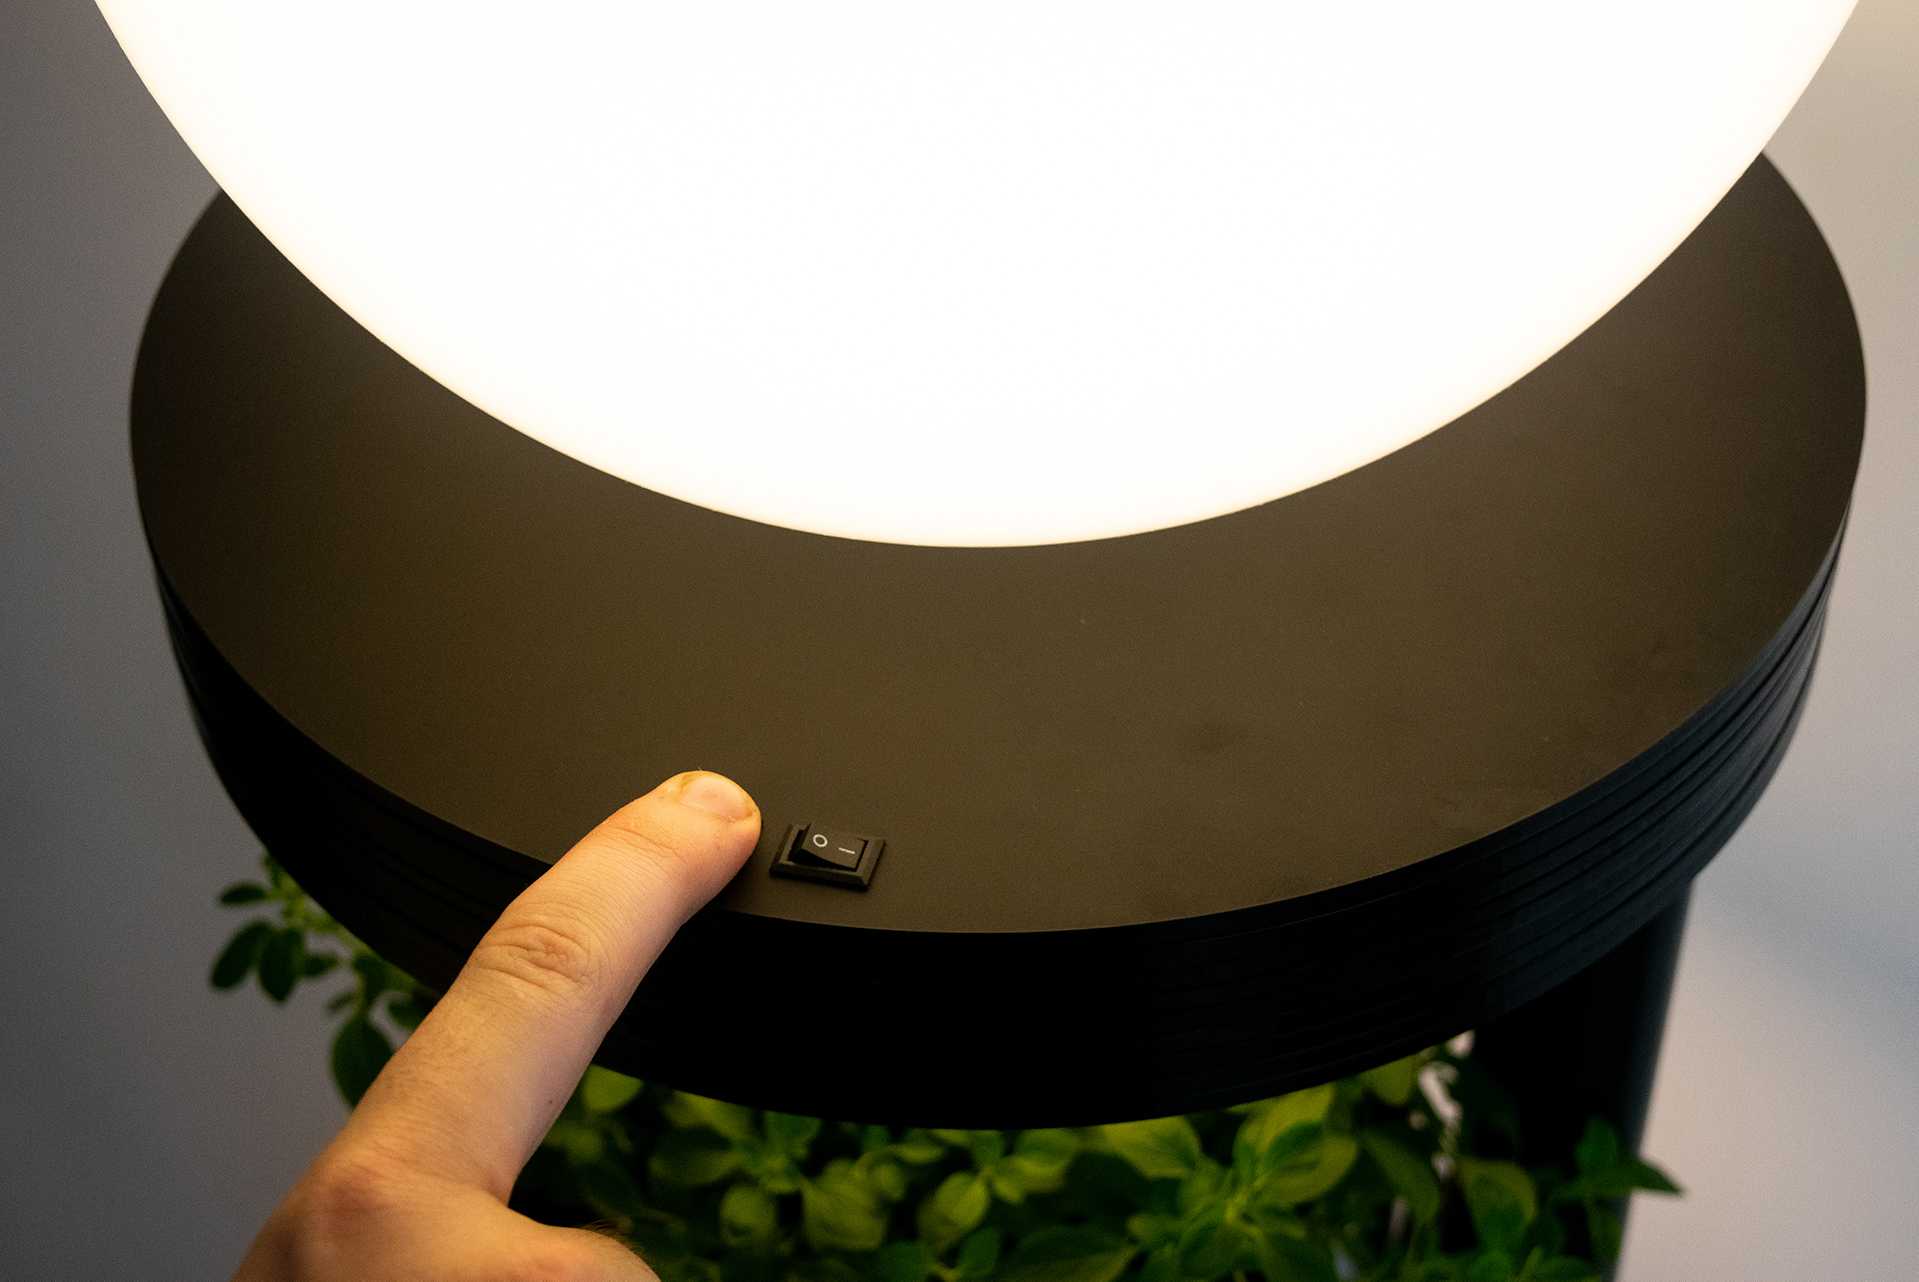 STACK helps keep your plants healthy with its full-spectrum LED panels mounted in each plate. Control your plant's light cycles with the ease of a simple on/off switch located at the top of the lamp. 2 on/off switches give you the opportunity to control the lamp head and LED panels individually from each other so you can give your plants the correct amount of light without having to have the big lamp on during the daytime and vise versa. 